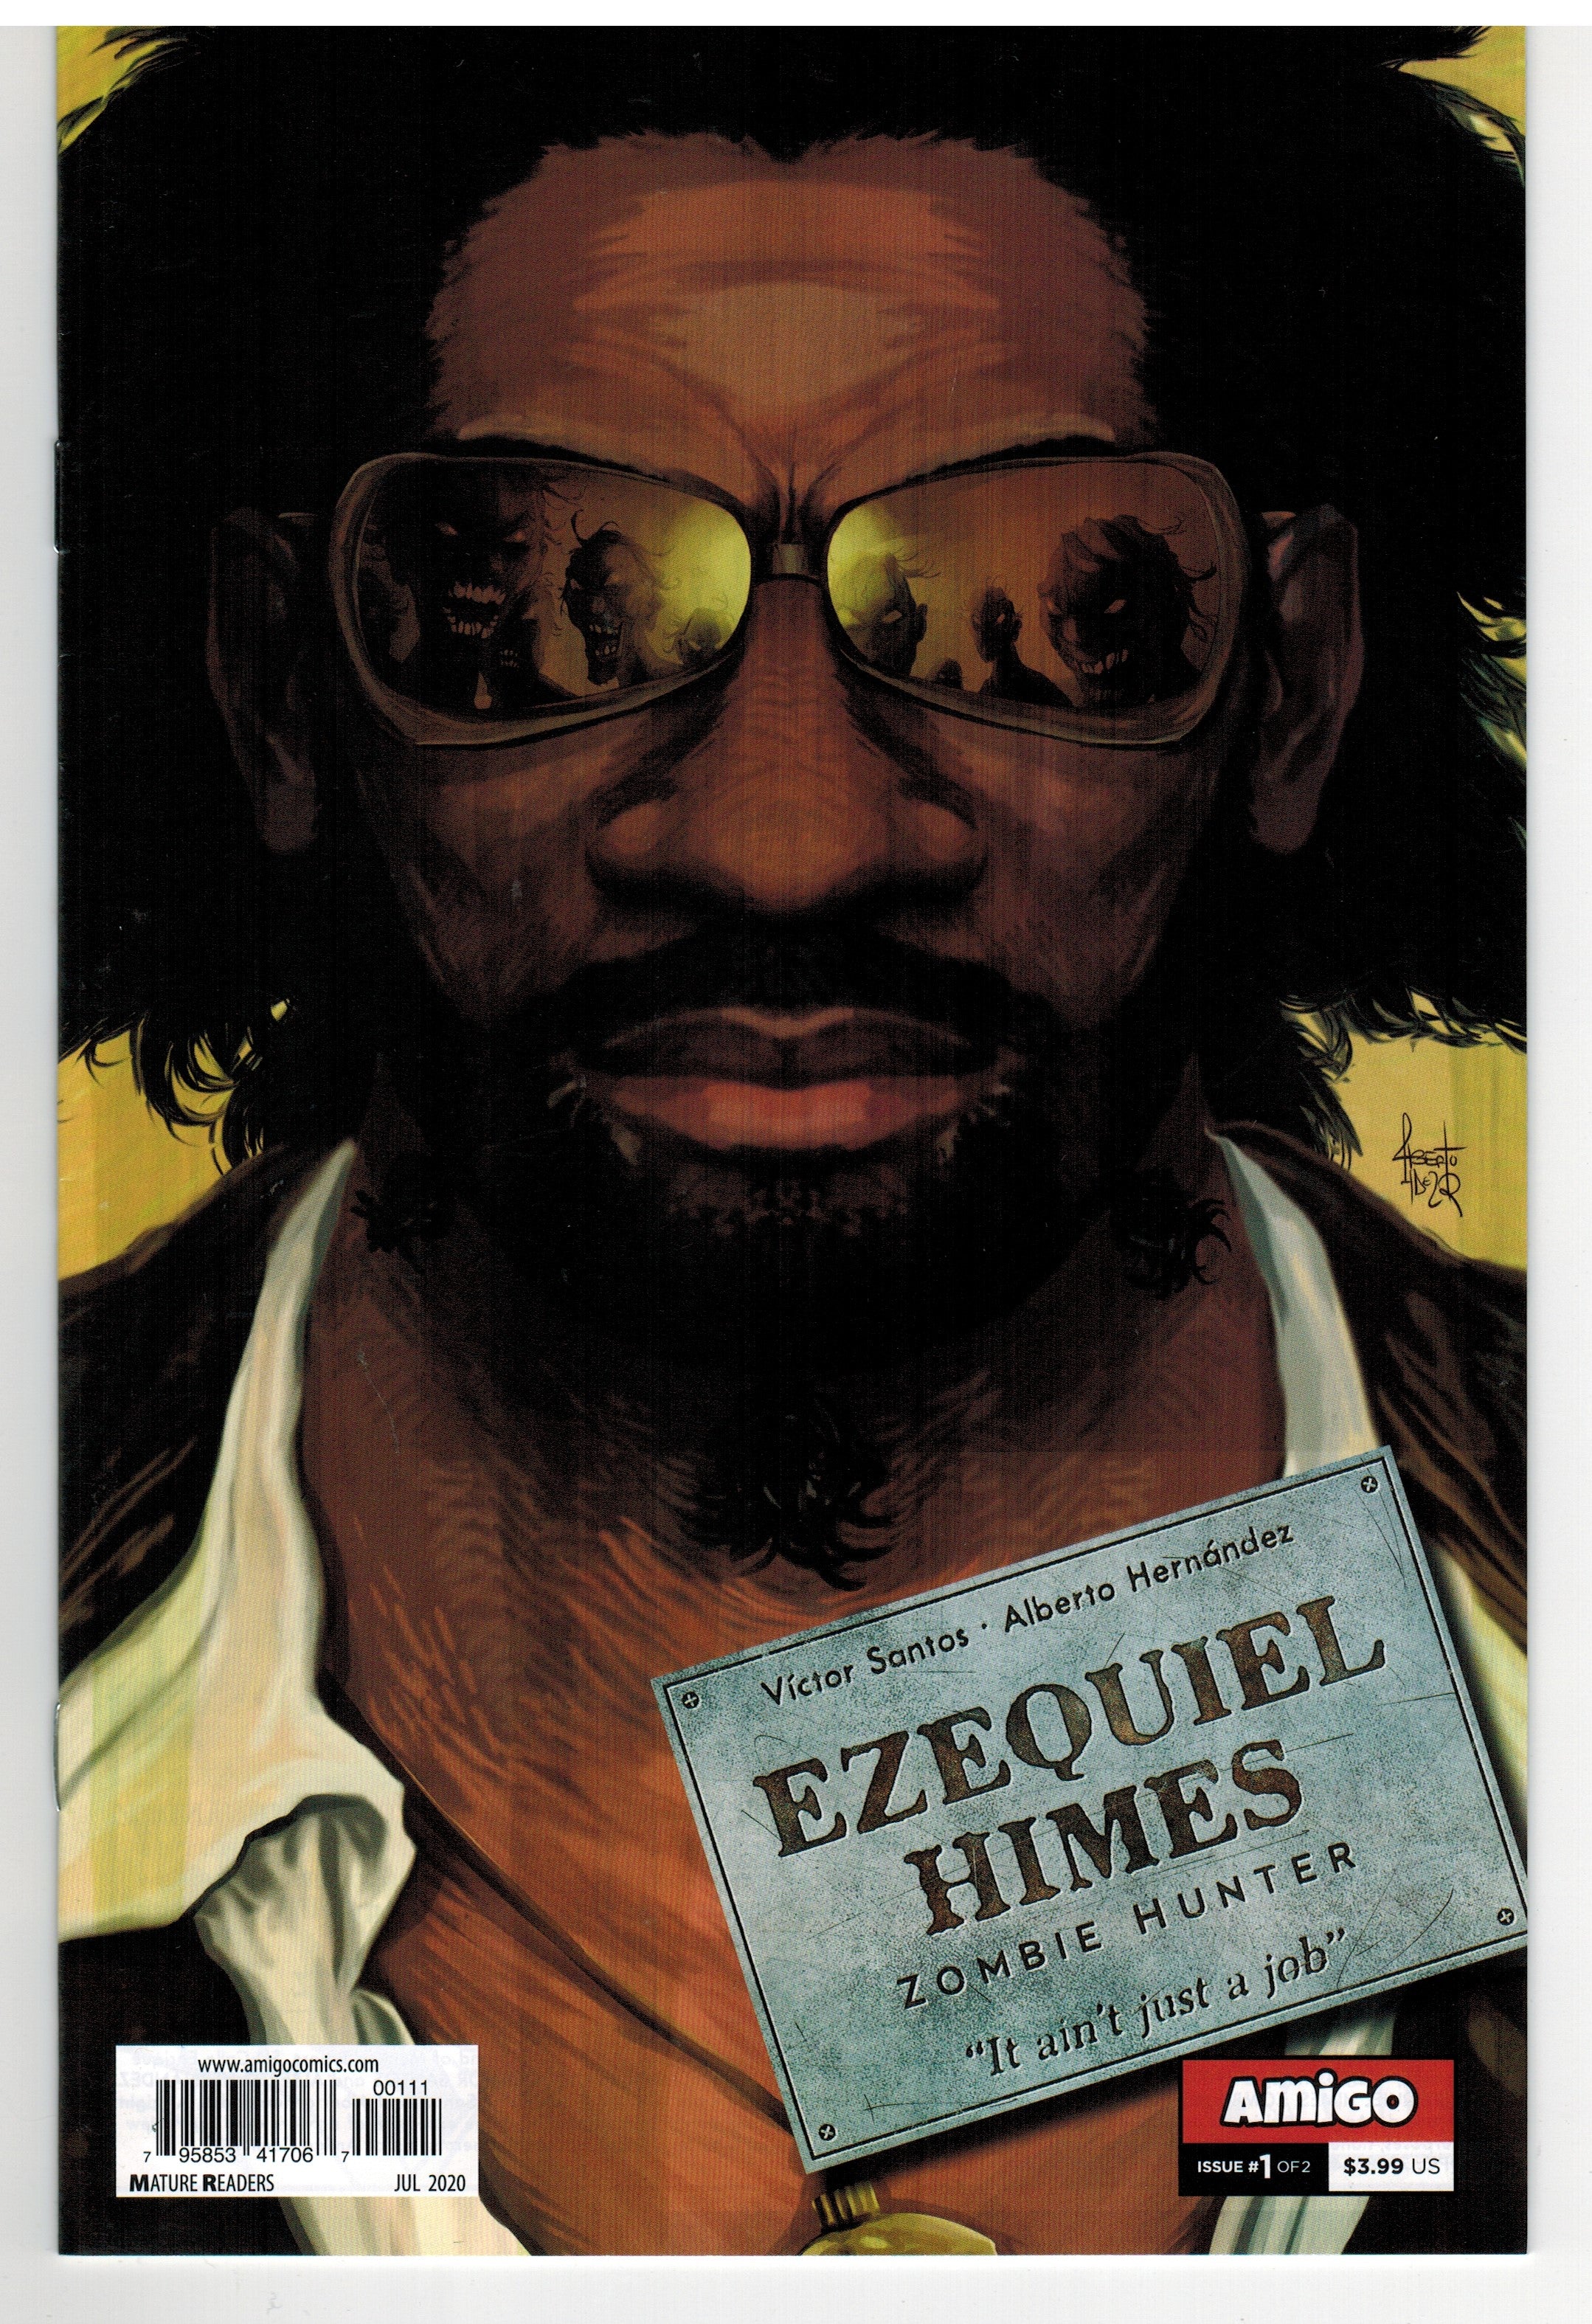 Photo of Ezequiel Himes Zombie Hunter (2020) Issue 1 - Near Mint Comic sold by Stronghold Collectibles